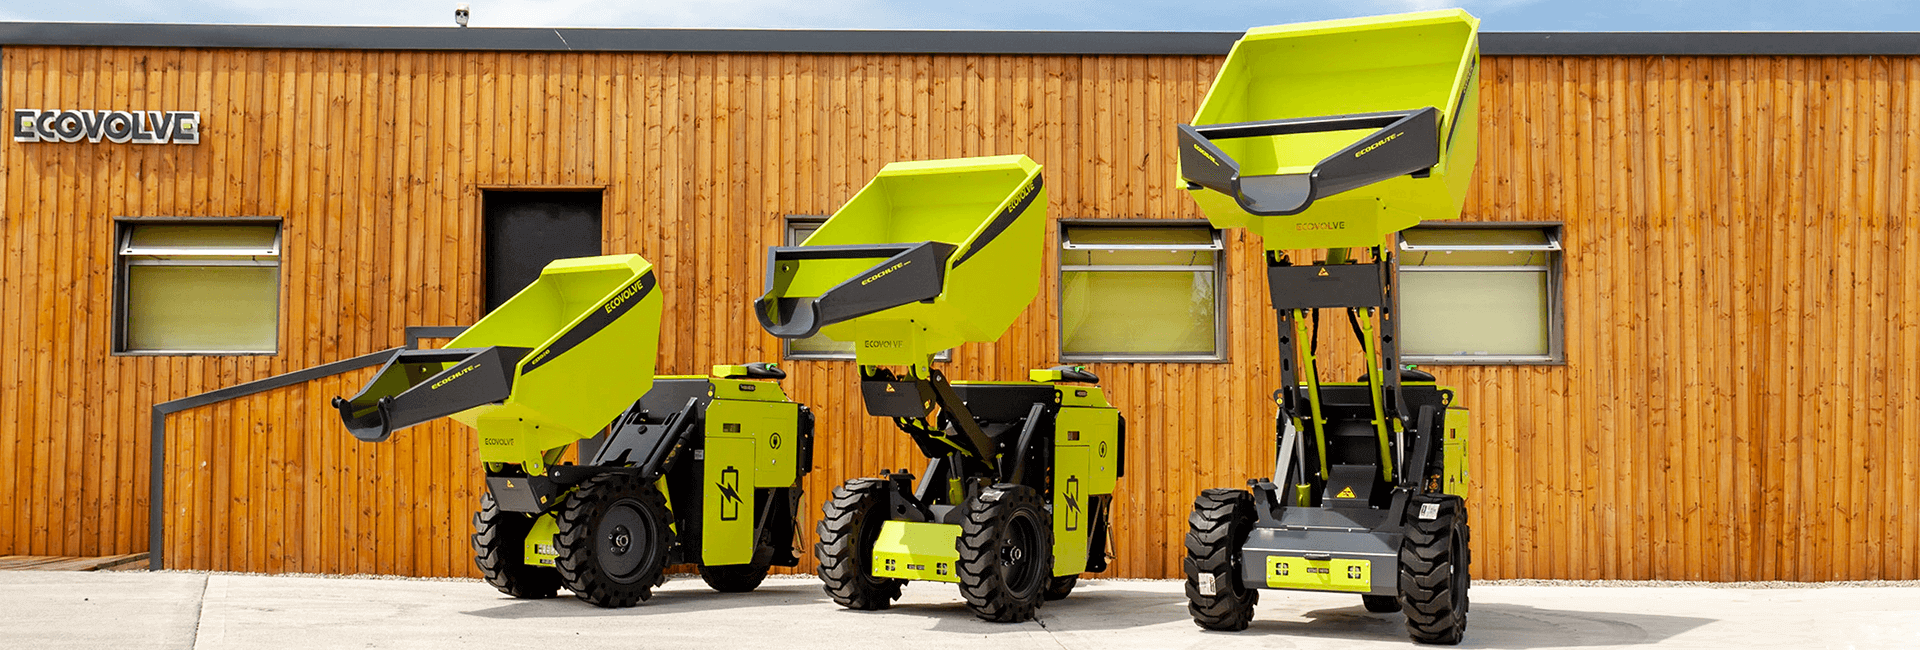 3 green electric dumpers outside building